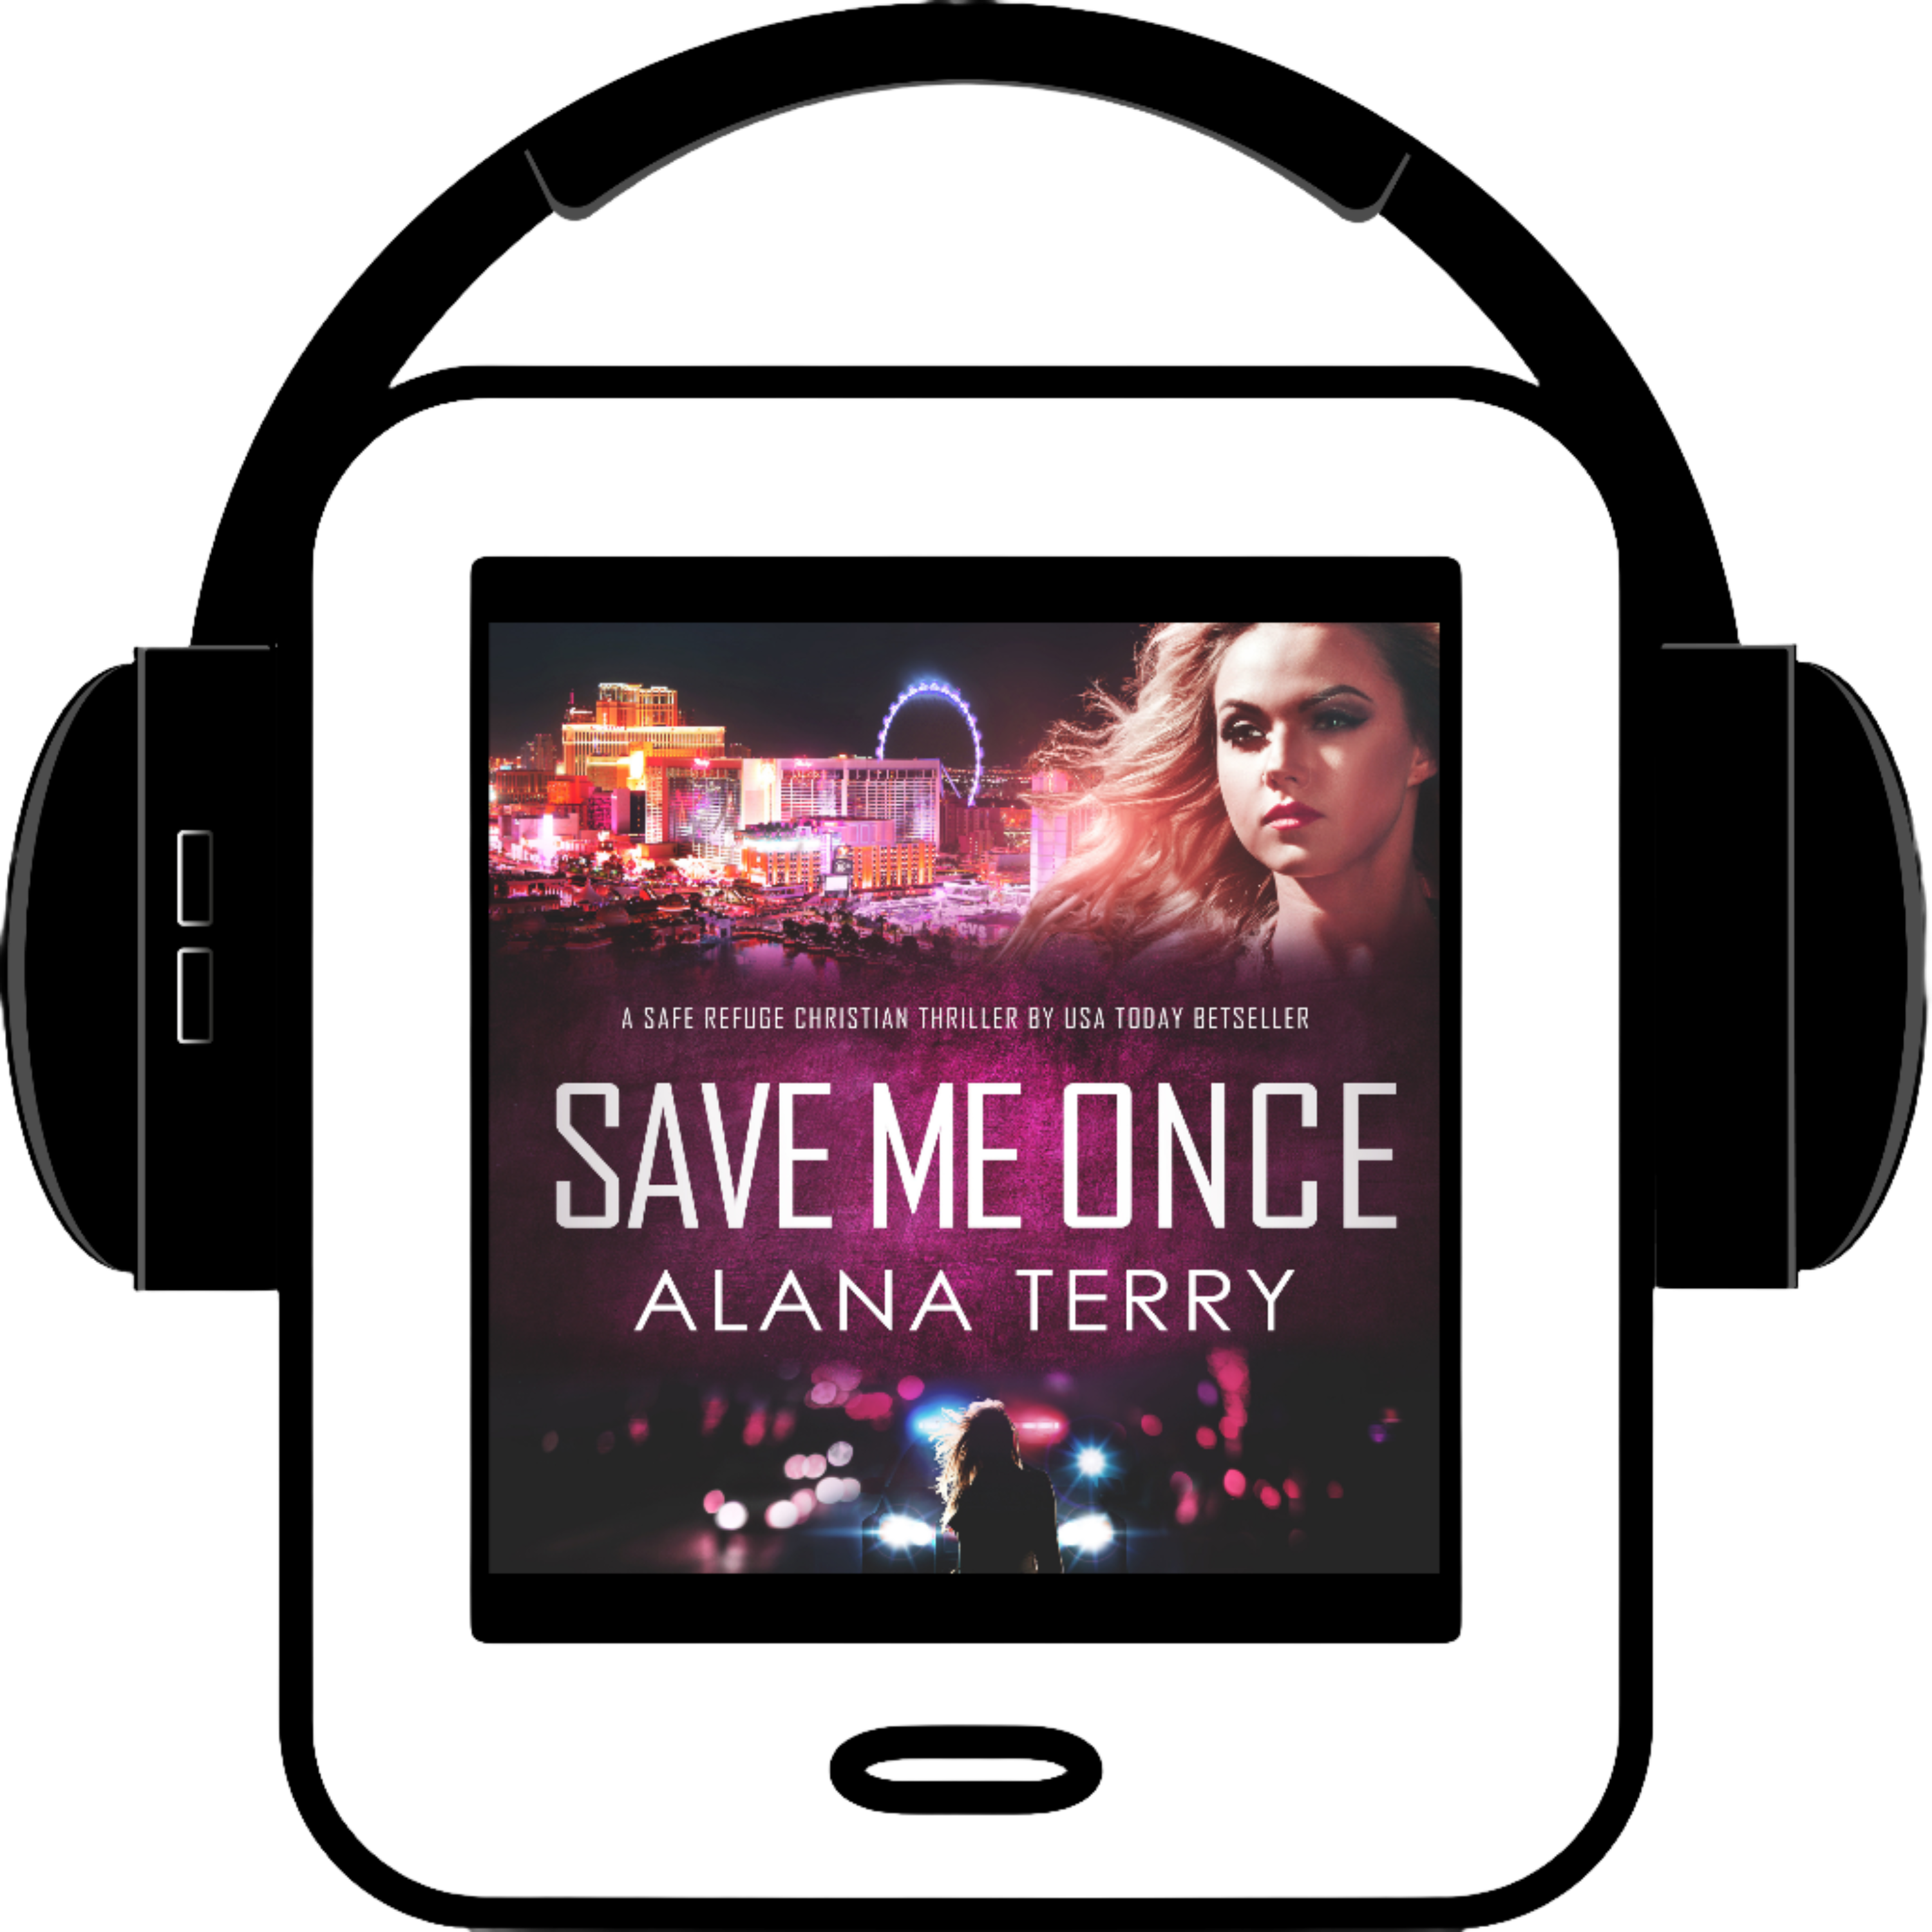 Save Me Once (audiobook)